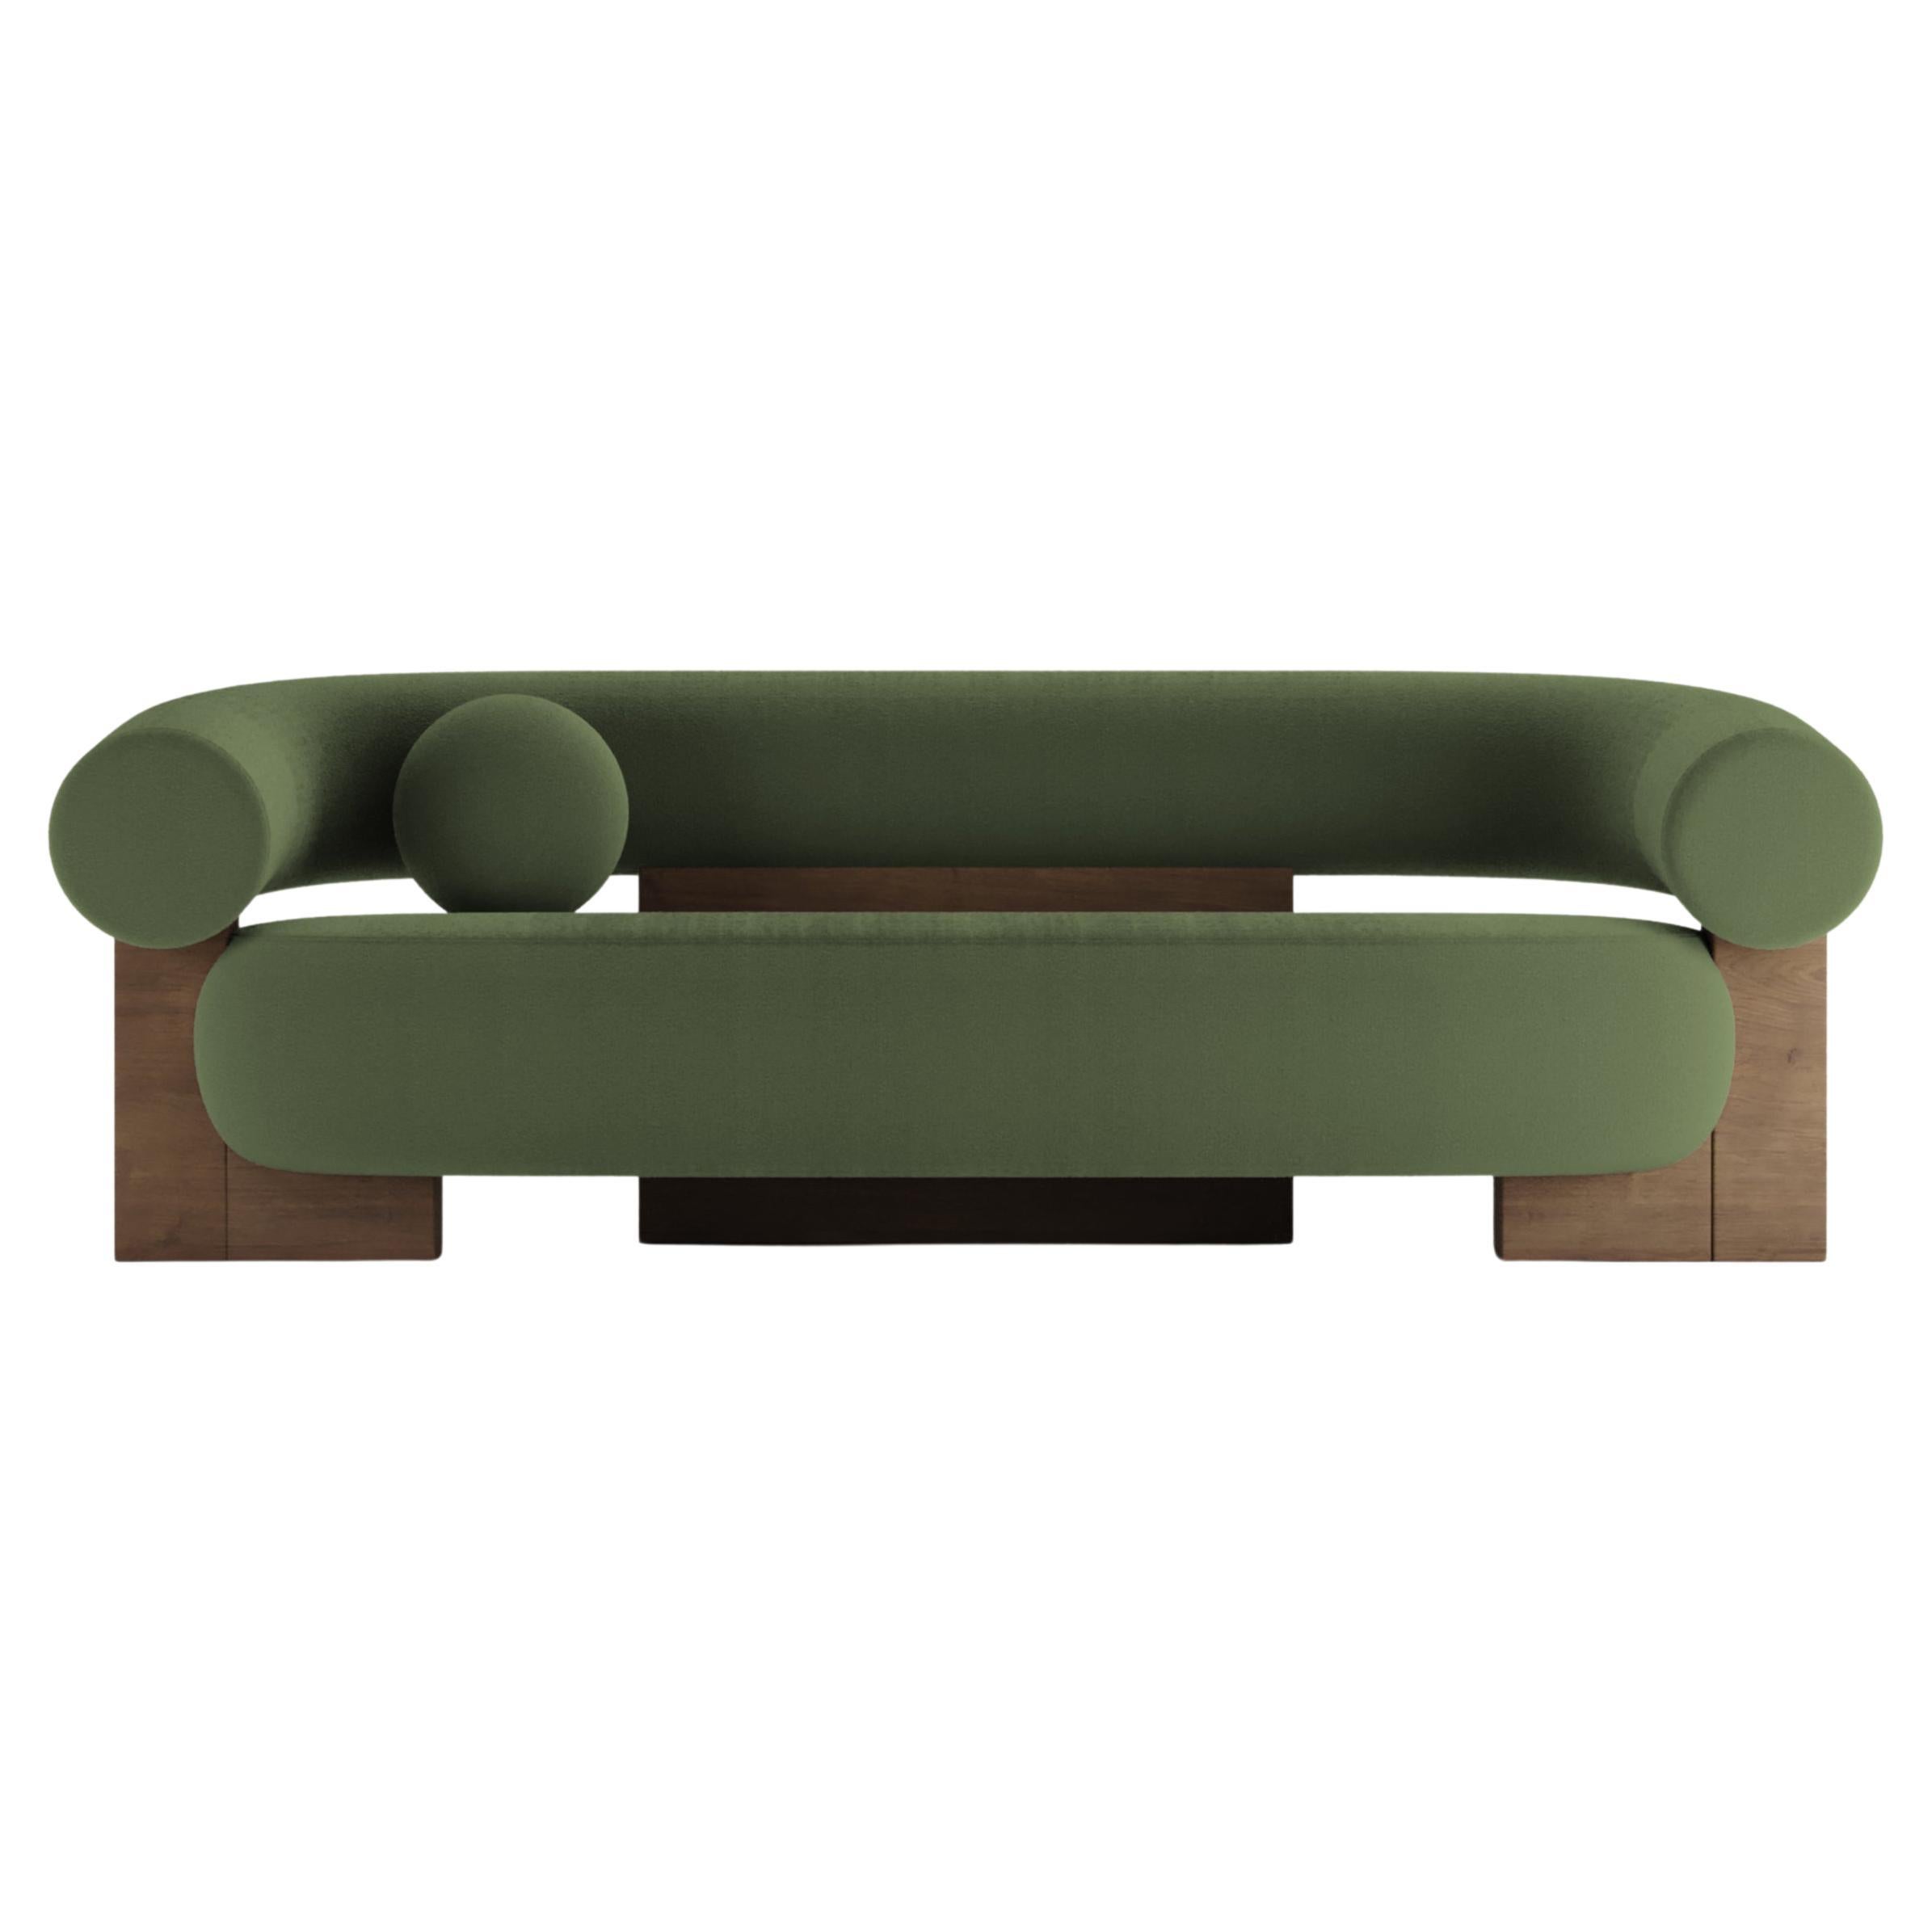 Contemporary Modern Cassete Sofa in Green & Wood by Collector Studio For Sale